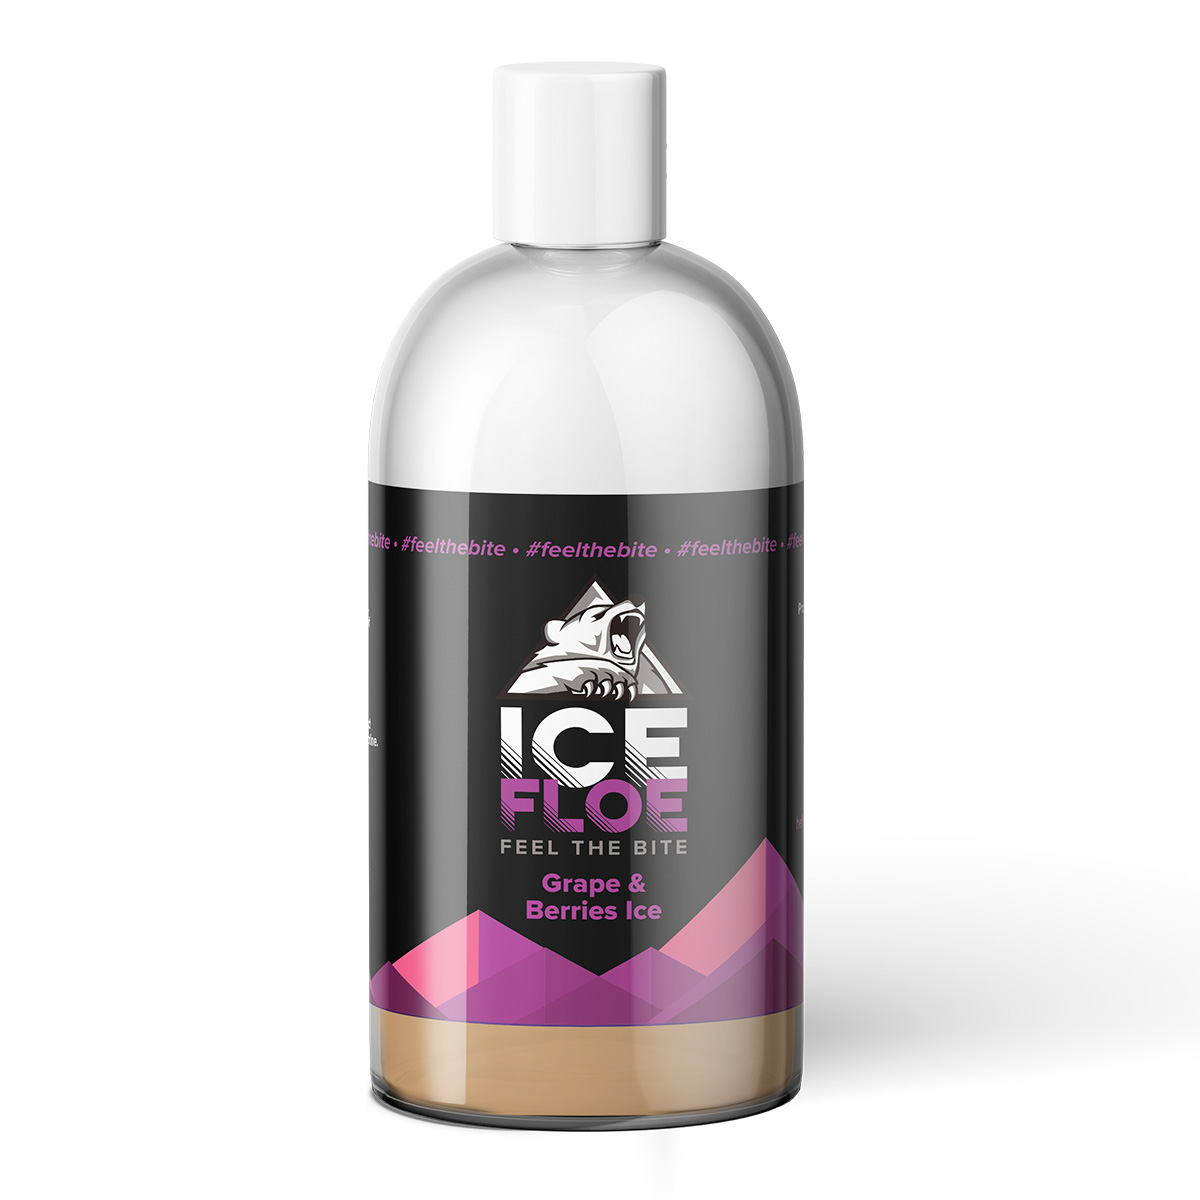 Grape & Berries Ice Flavour Shot by Ice Floe - 250ml